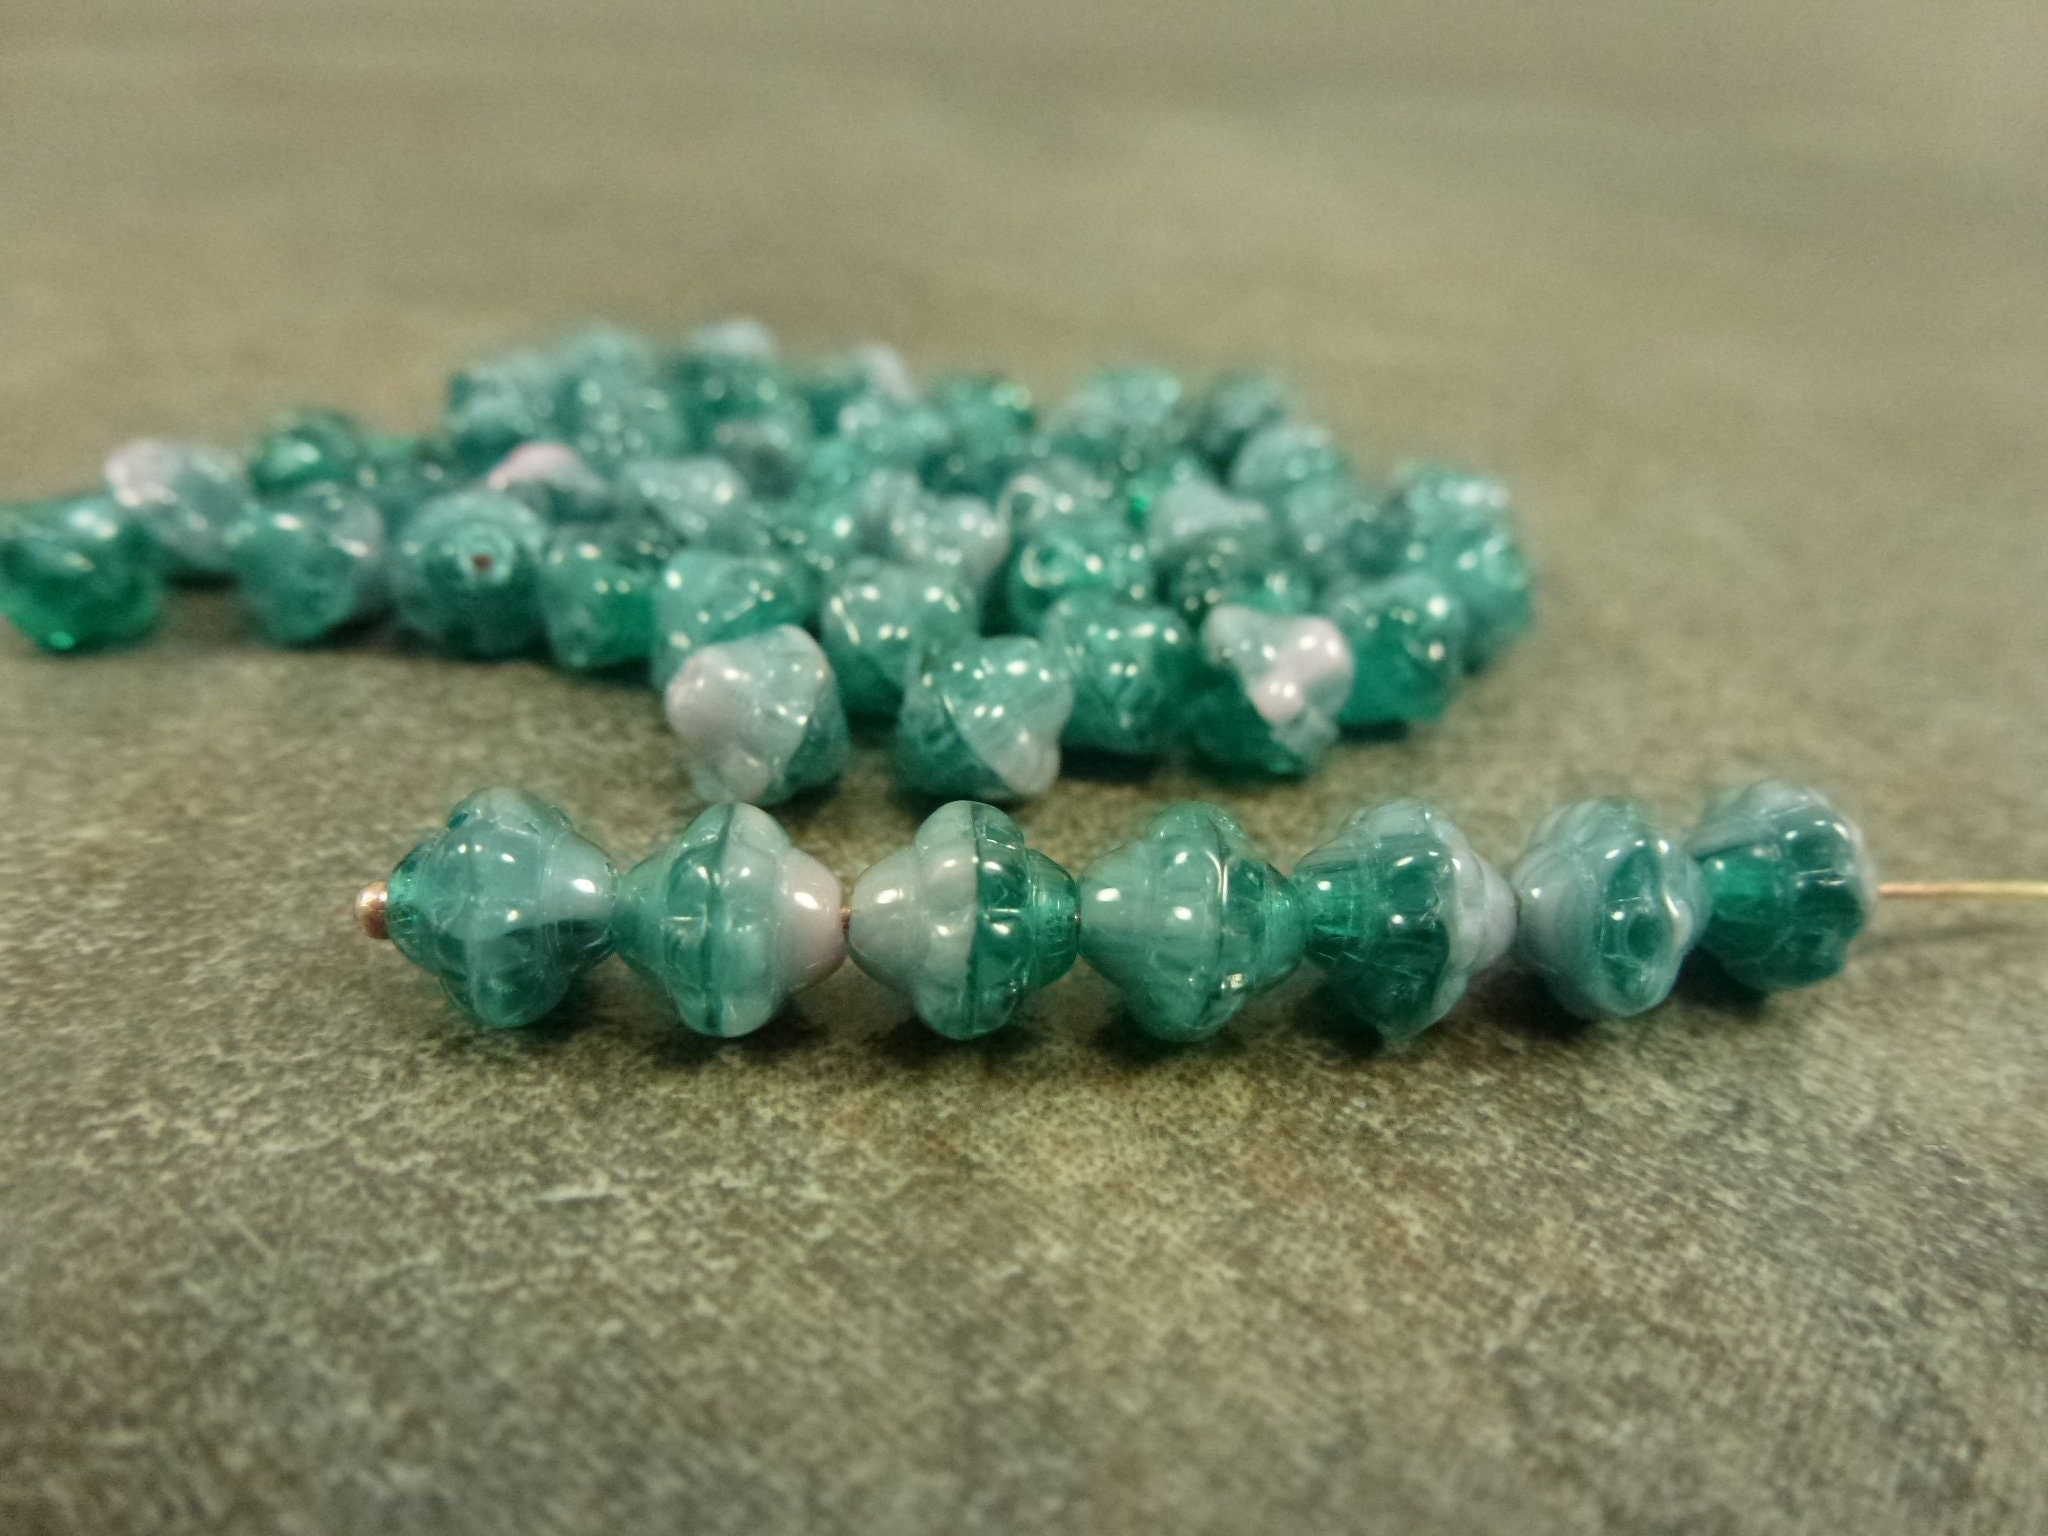 Teal Green & Light Pink Blend, Czech Glass Turbine Beads, 6mm, 50Pc, Etched Pressed Mulberry Saucer Rondelle